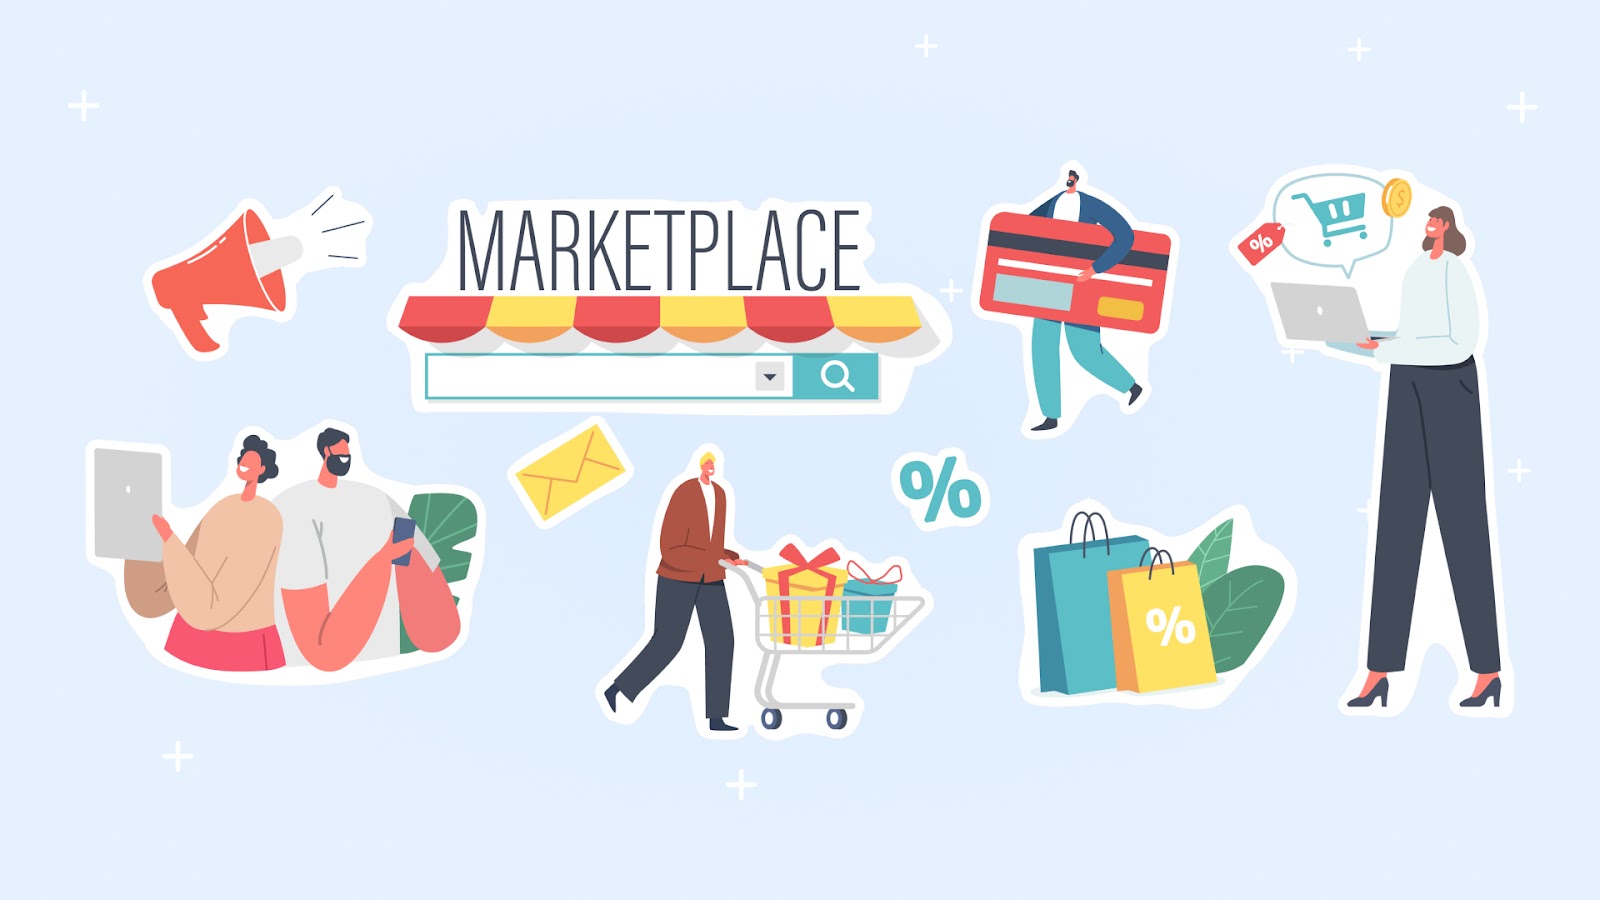 Why our marketplace website is a great alternative to big-box retailers